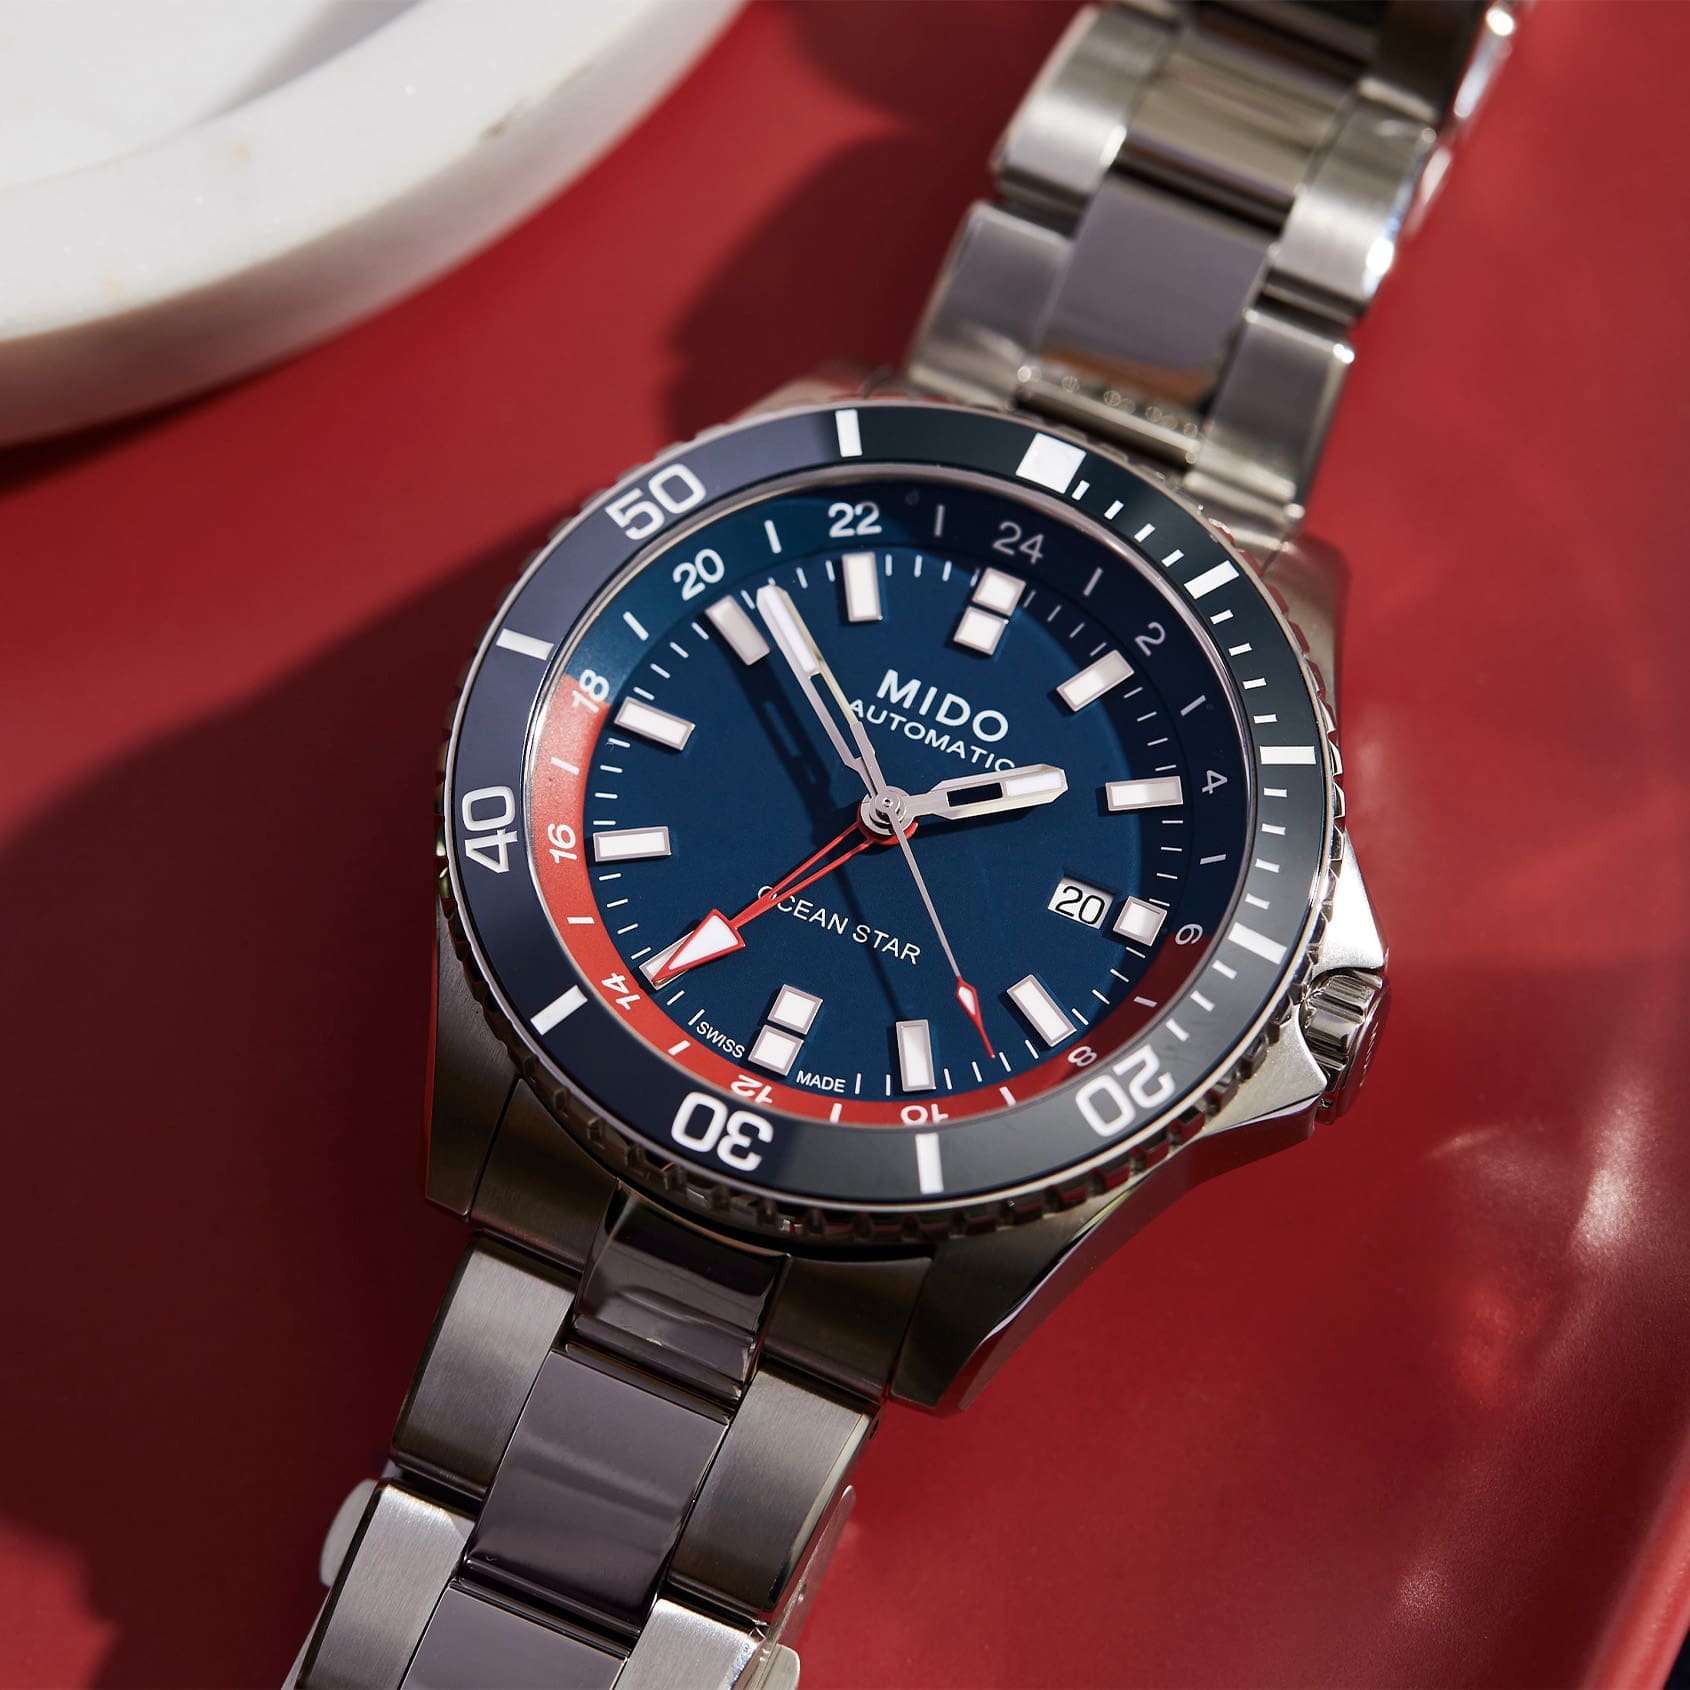 HANDS-ON: The Mido Ocean Star GMT Special Edition is a sporty refresh of the best value Swiss GMT around